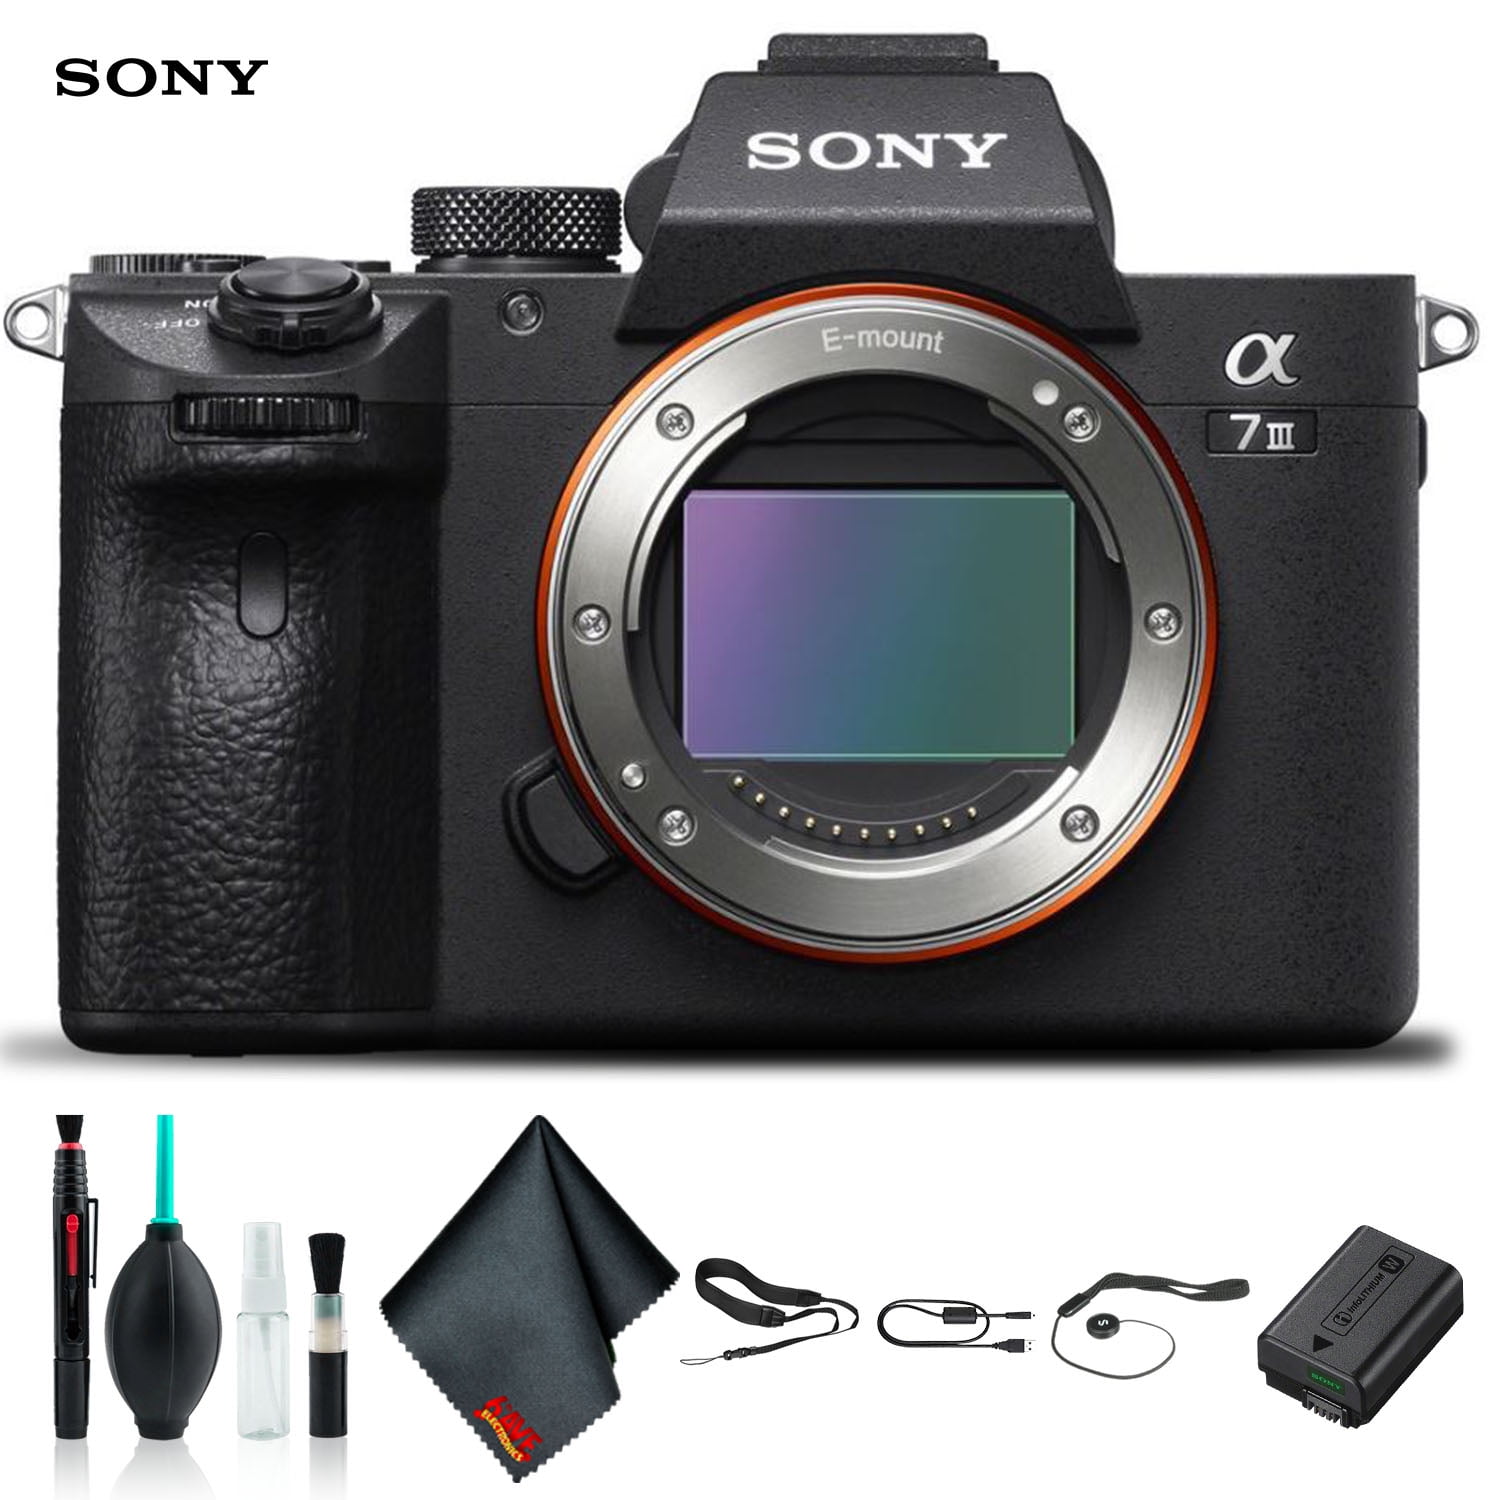 Includes: Dust Blower Brush 25 Lens Tissue Lens Solution 5 Cotton Swabs Digital Camera Cleaning Kit Compatible with Sony Alpha a7R III Mirrorless Digital Camera Cleaning Cloth